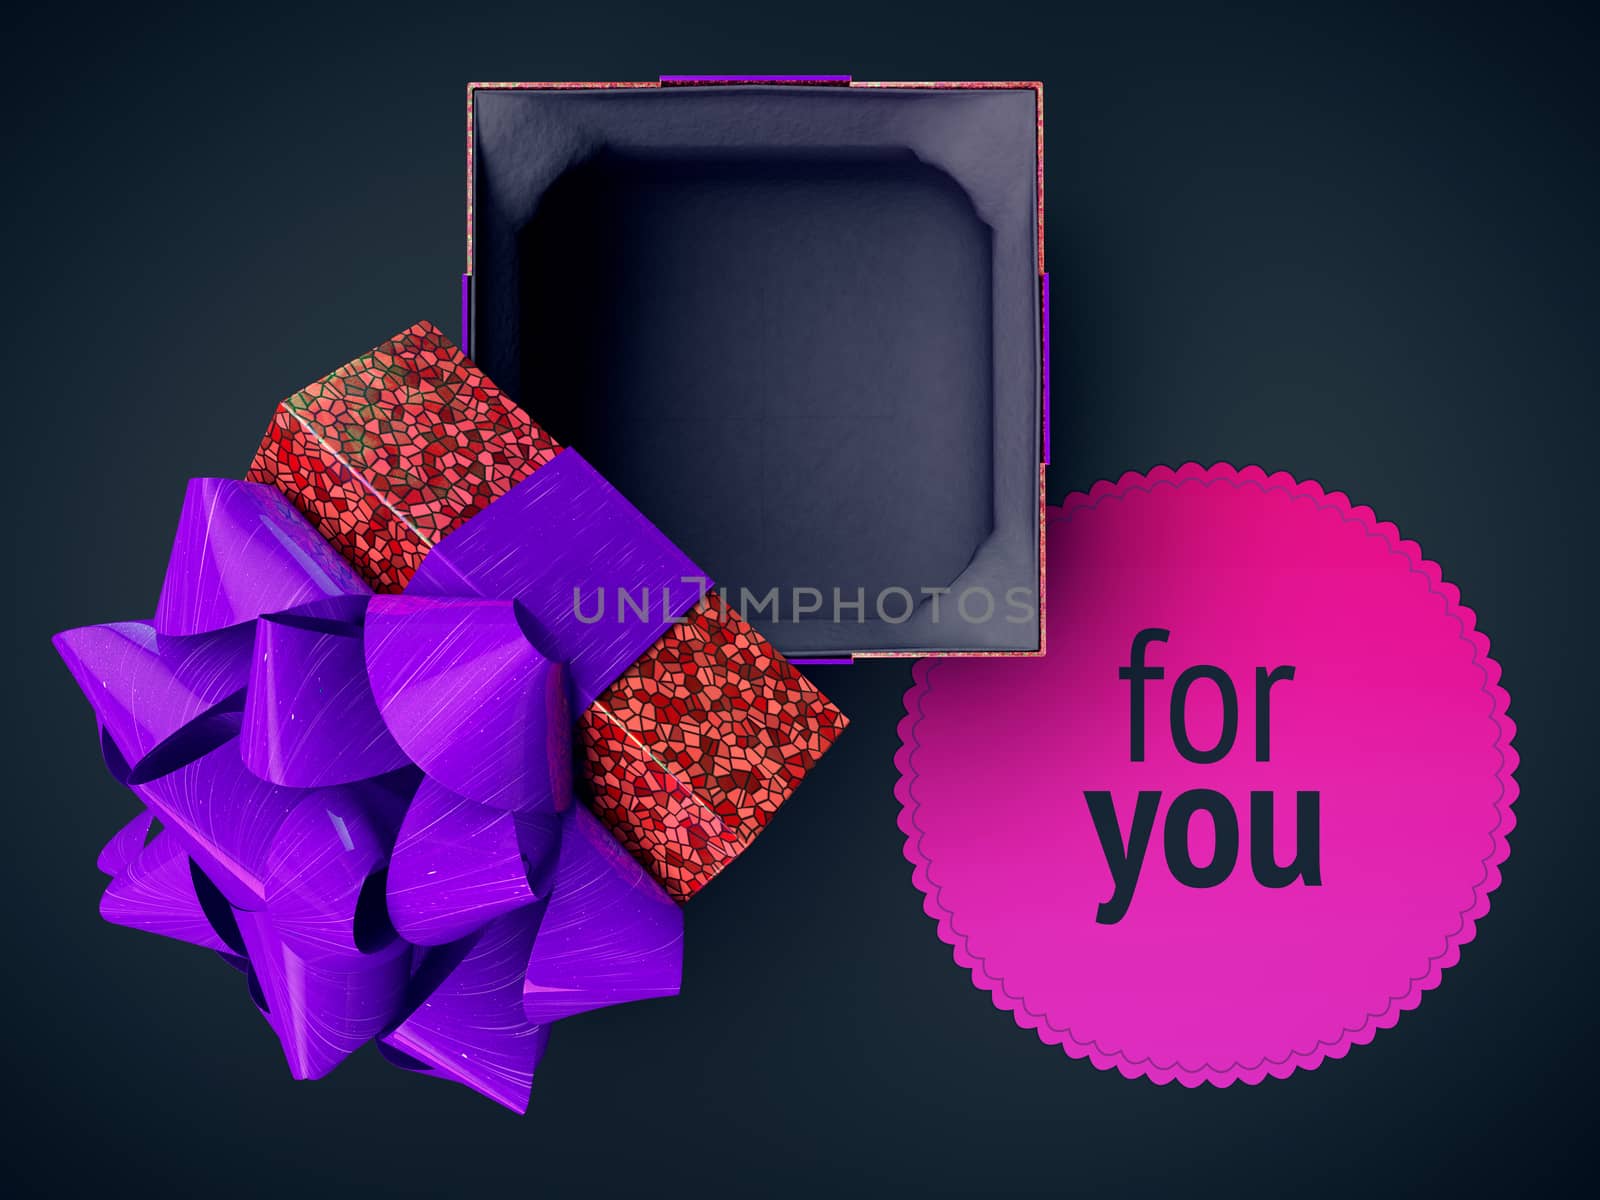 render cg illustration top view gift box purple opened cover cap lid violet empty present case on vivid gradient and space text placement isolated on dark by xtate